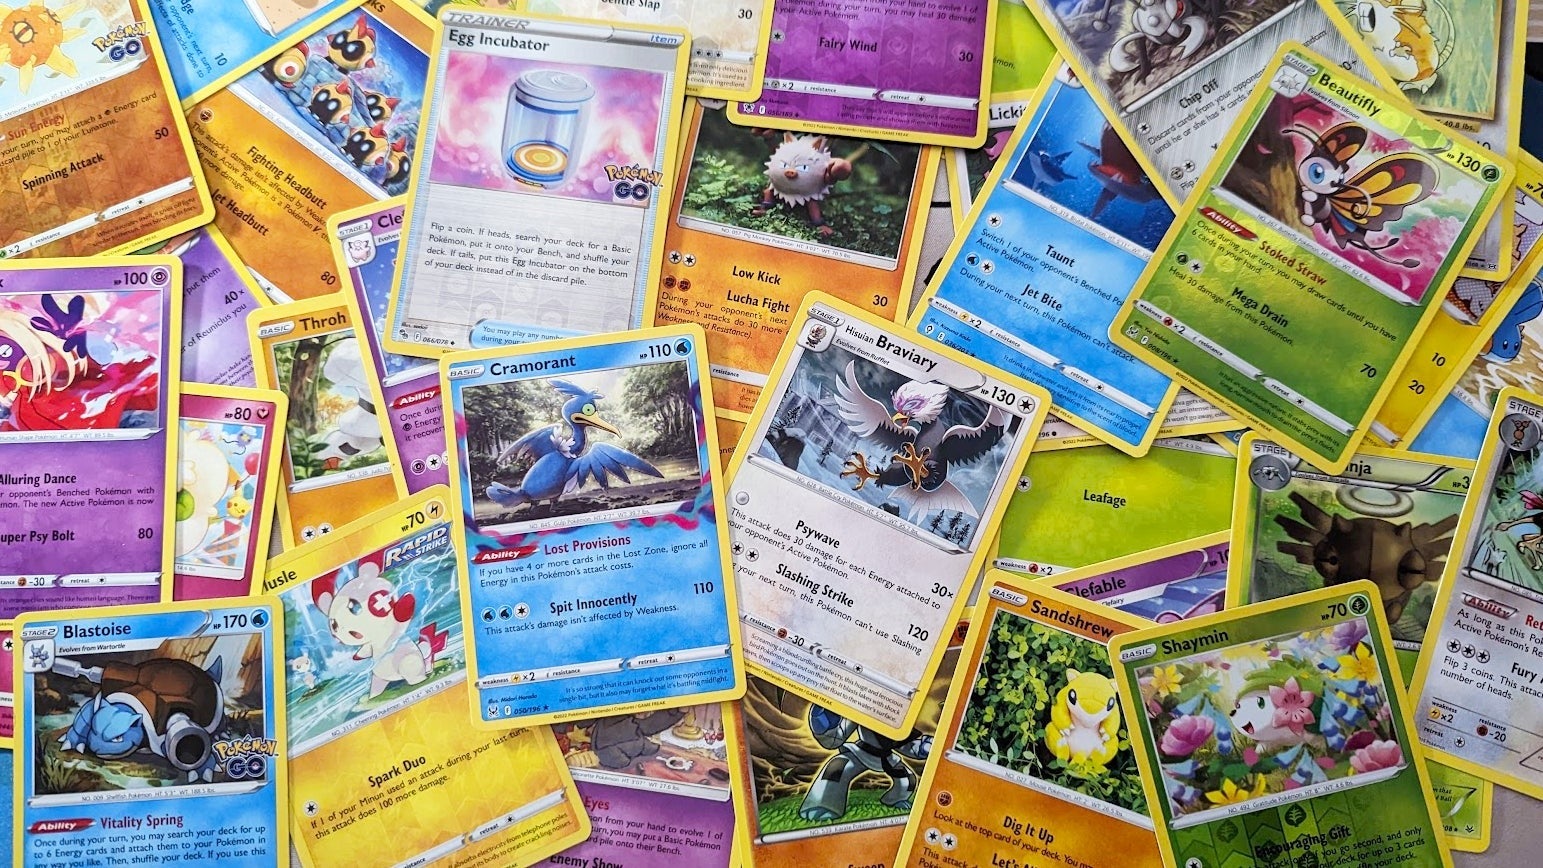 Ex-Bank Robber’s New Heist: Scamming Pokémon Card Buyers For Millions